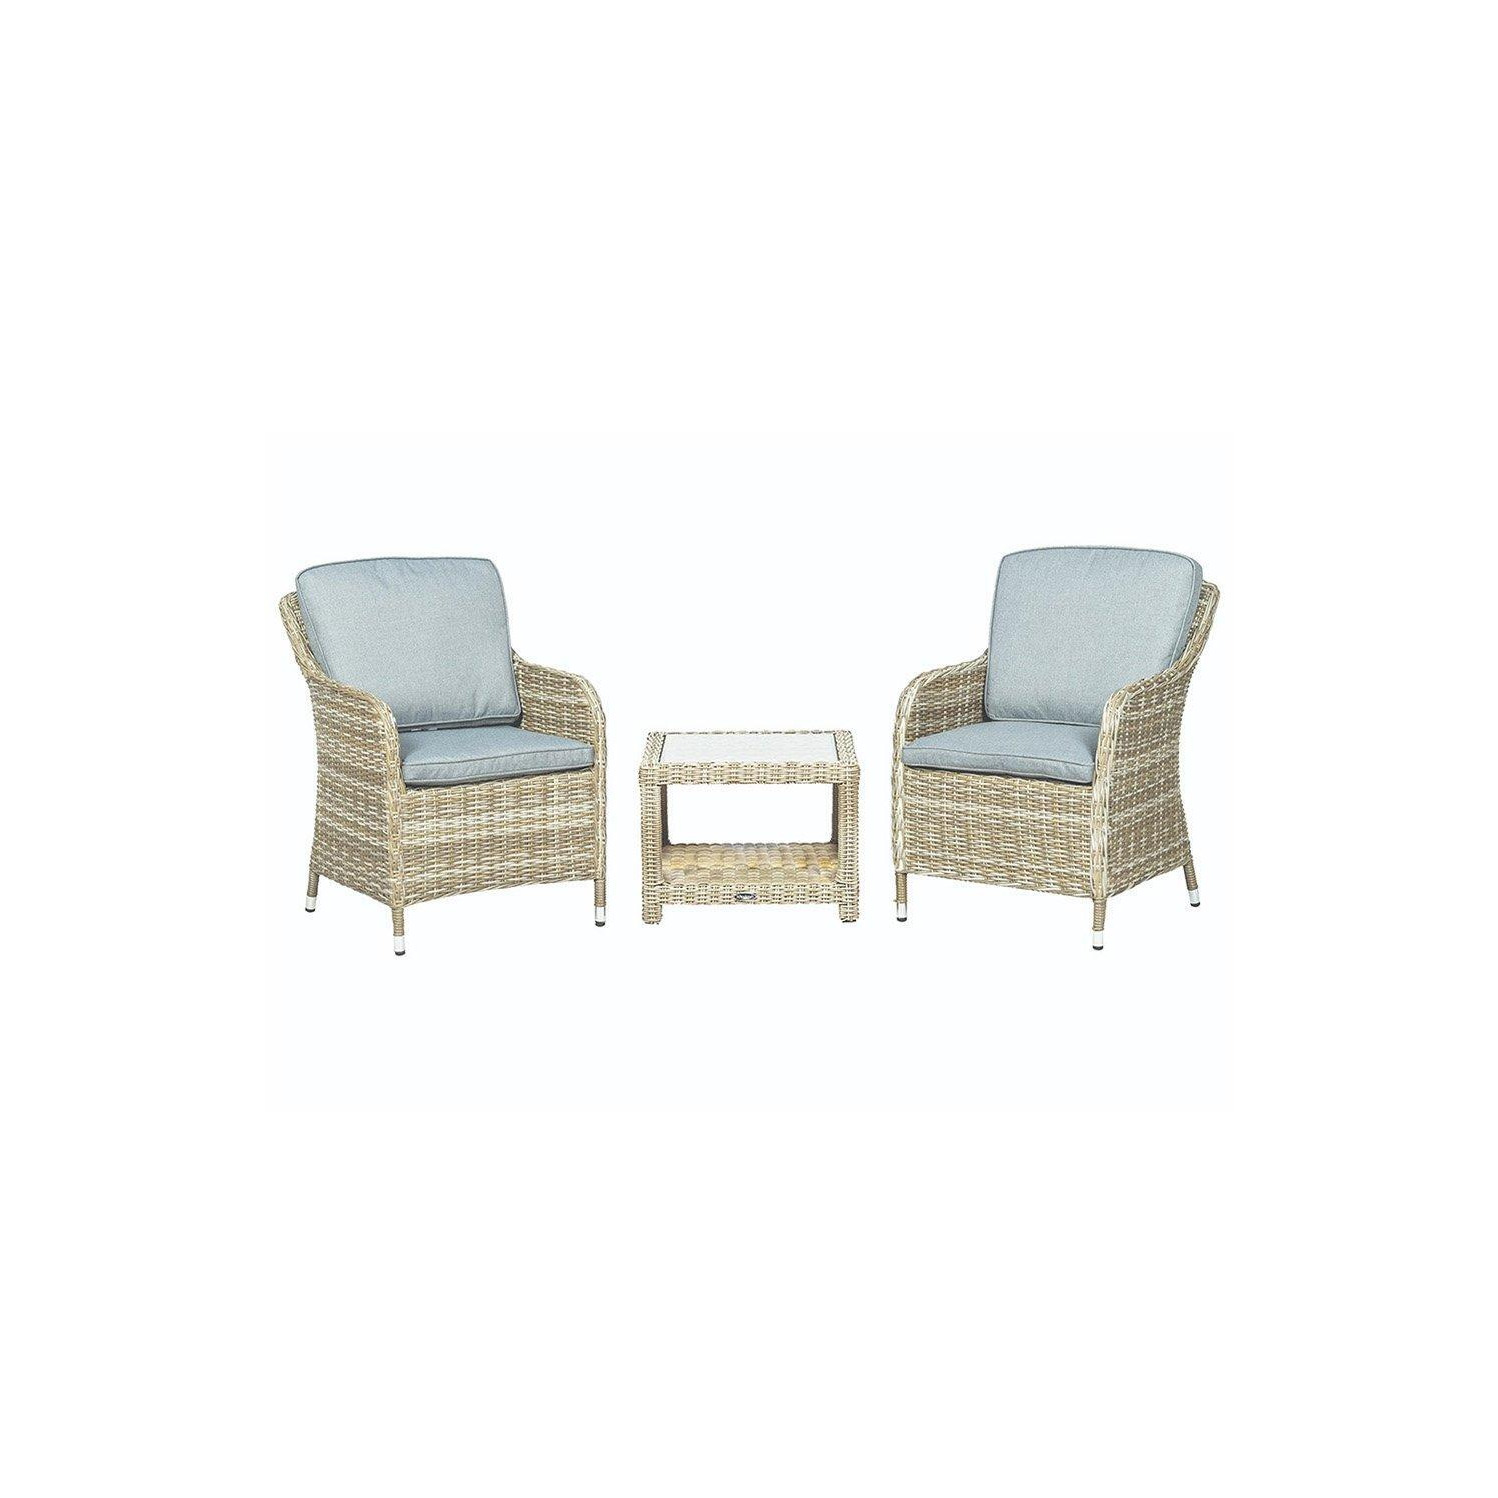 WENTWORTH 2 Seater 3pc Imperial Companion Set - image 1